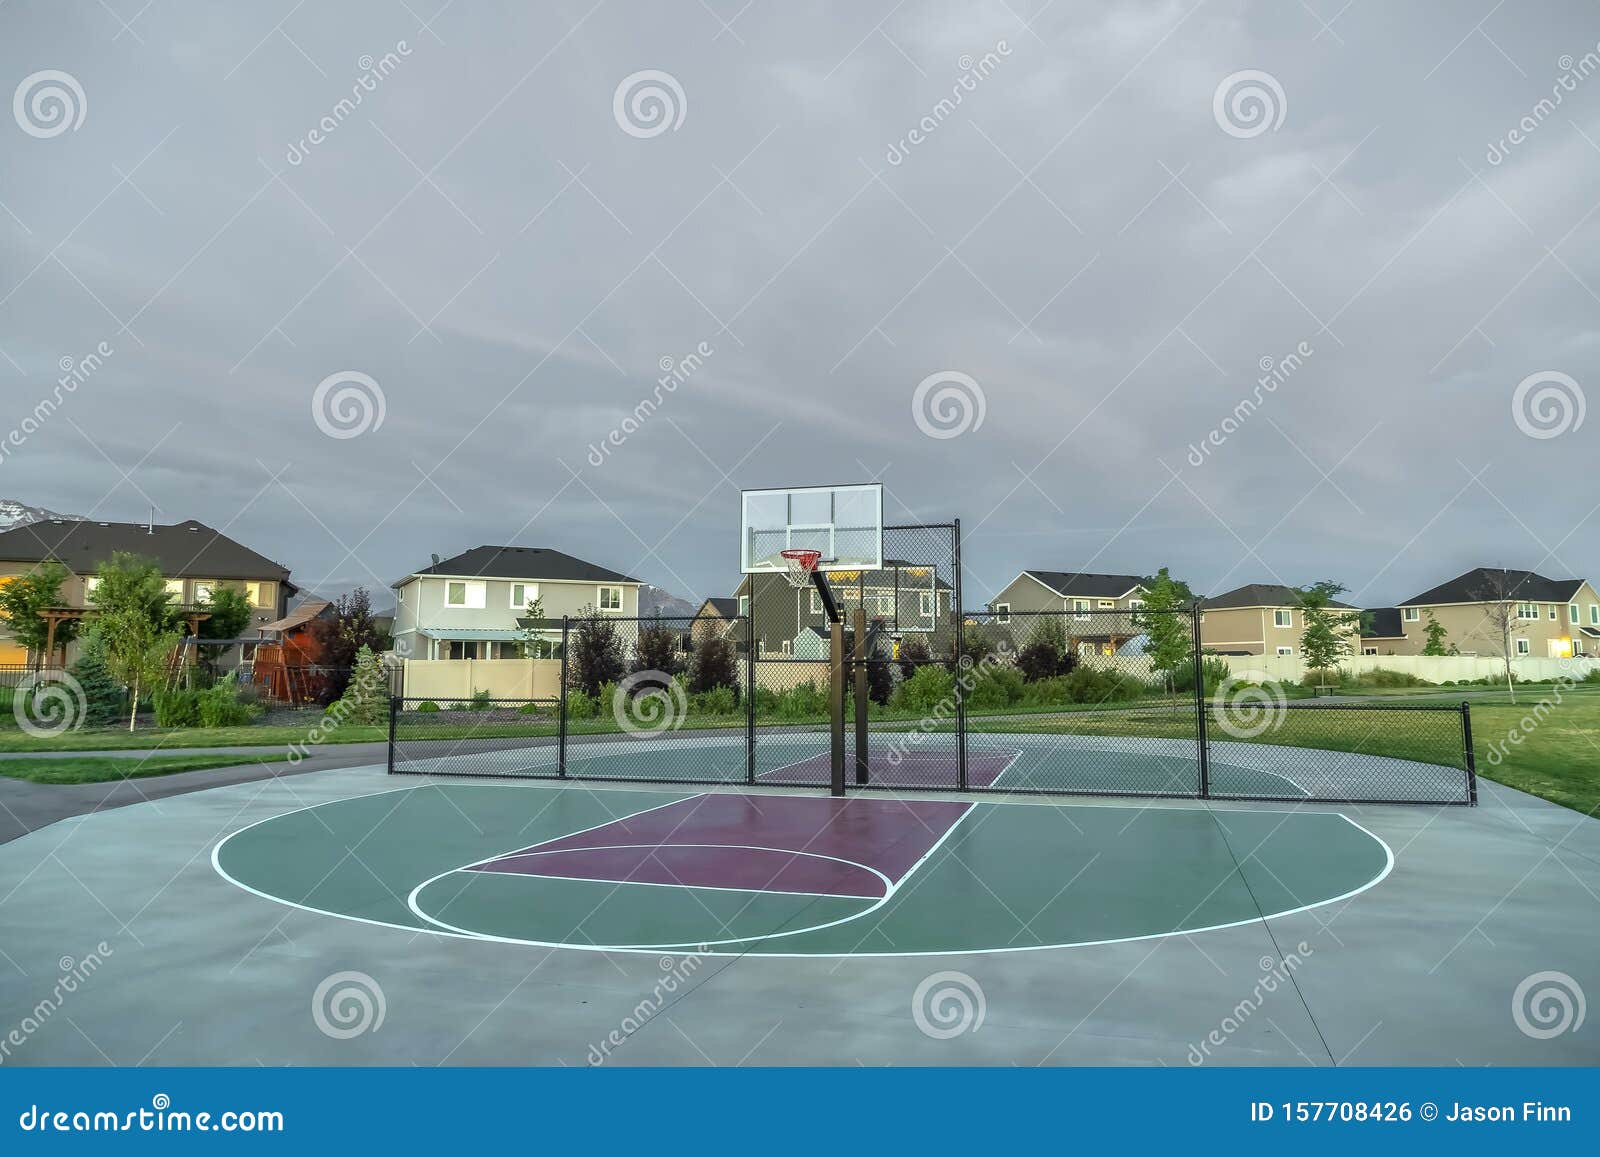 Basketball Cout in the Middle of a Neighborhood with an Overcast Sky  Overhead Stock Photo - Image of clouds, cloudy: 157708426